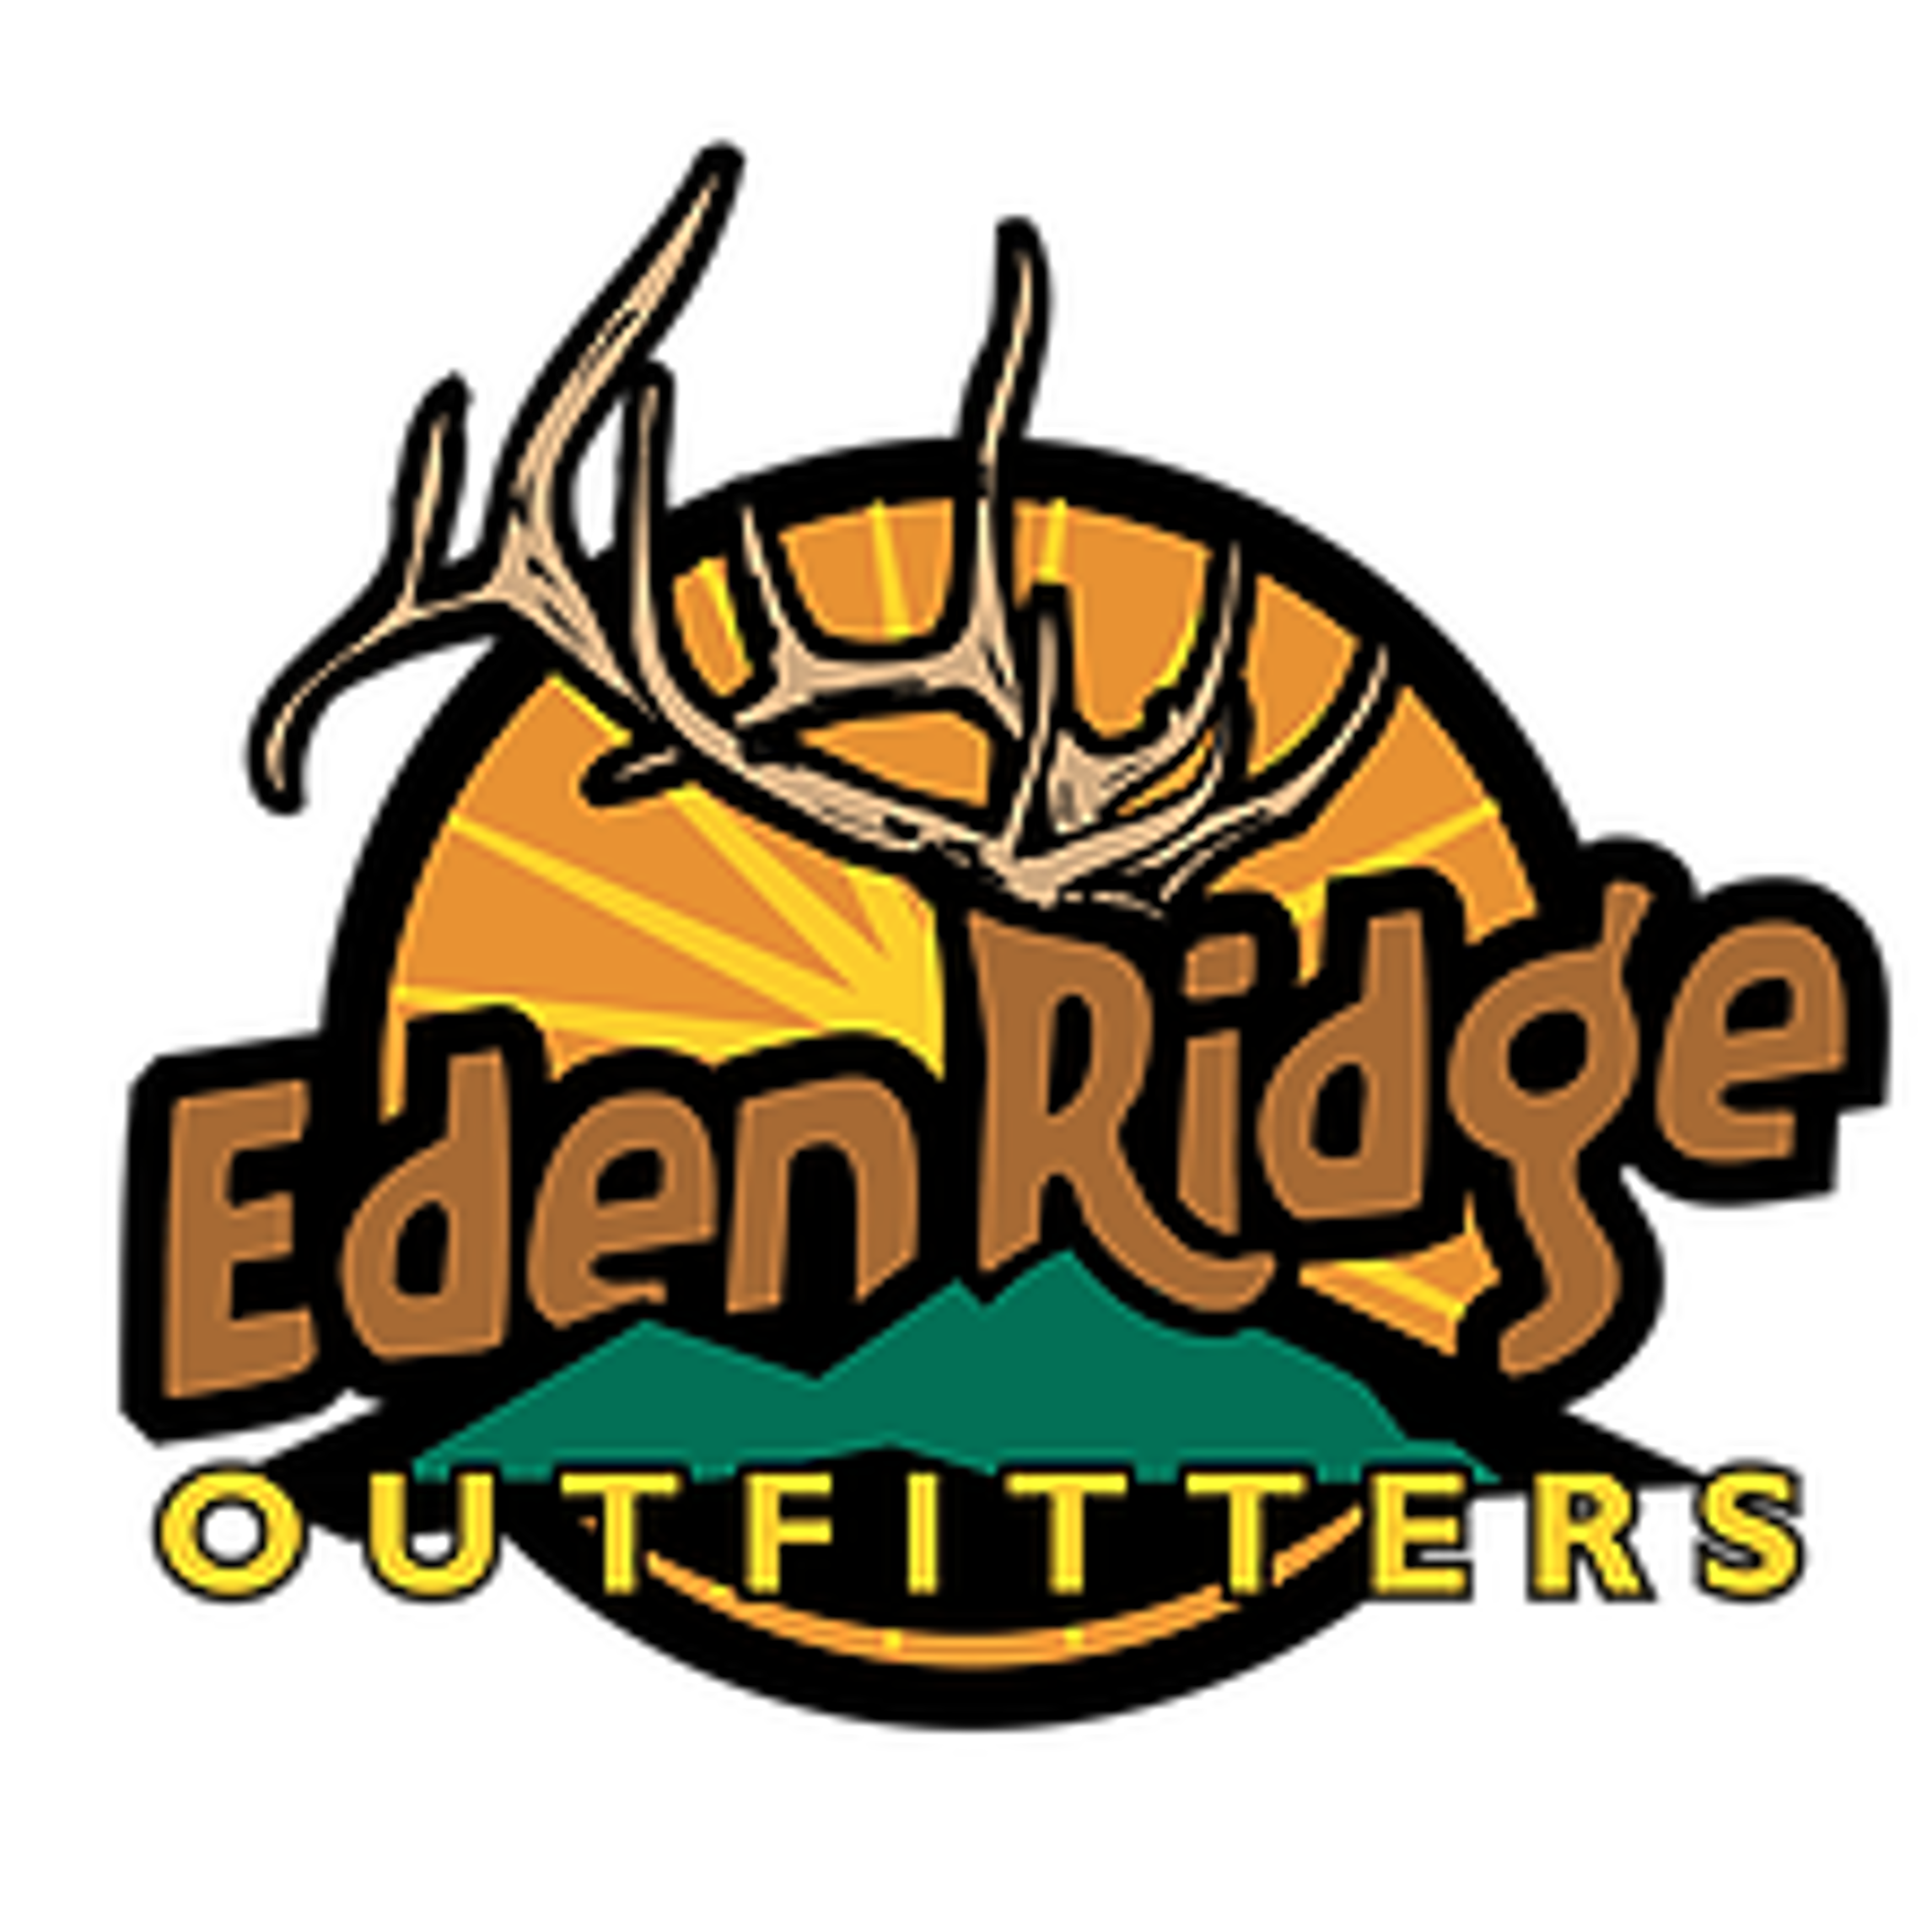 Eden Ridge Outfitters